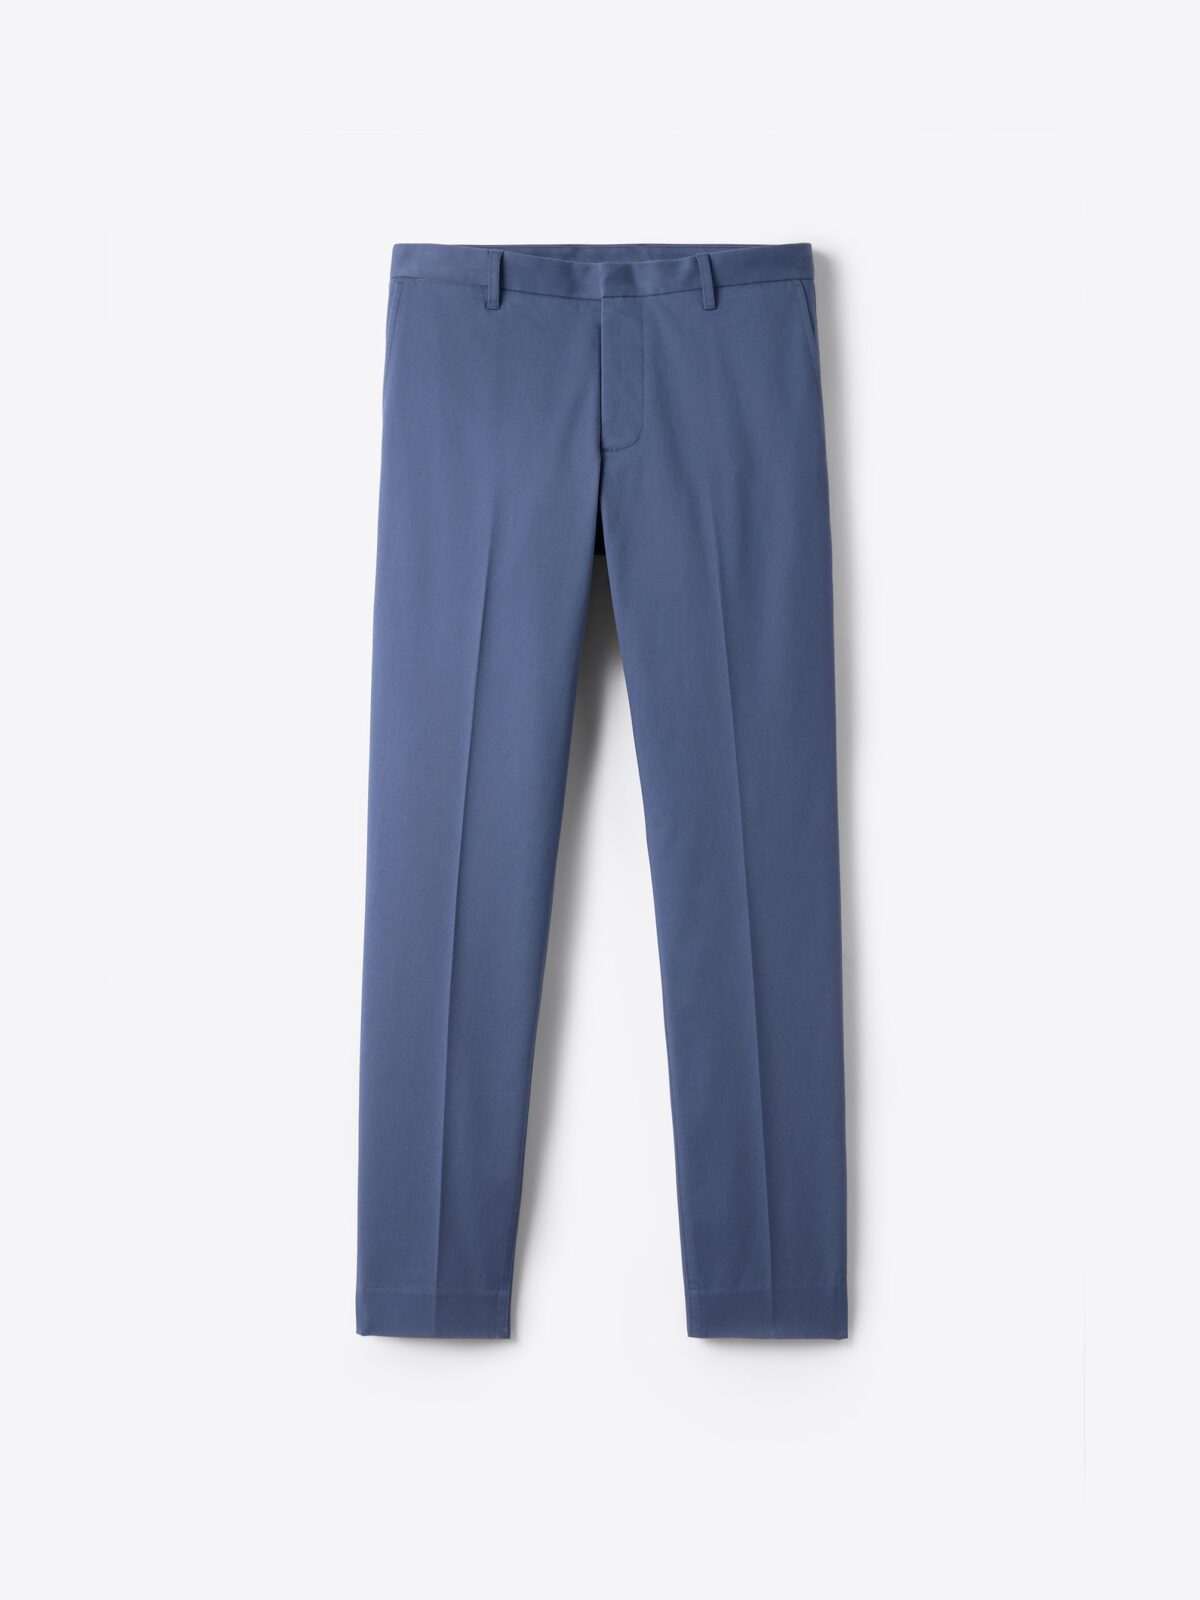 The Refined Stretch Cotton Trouser